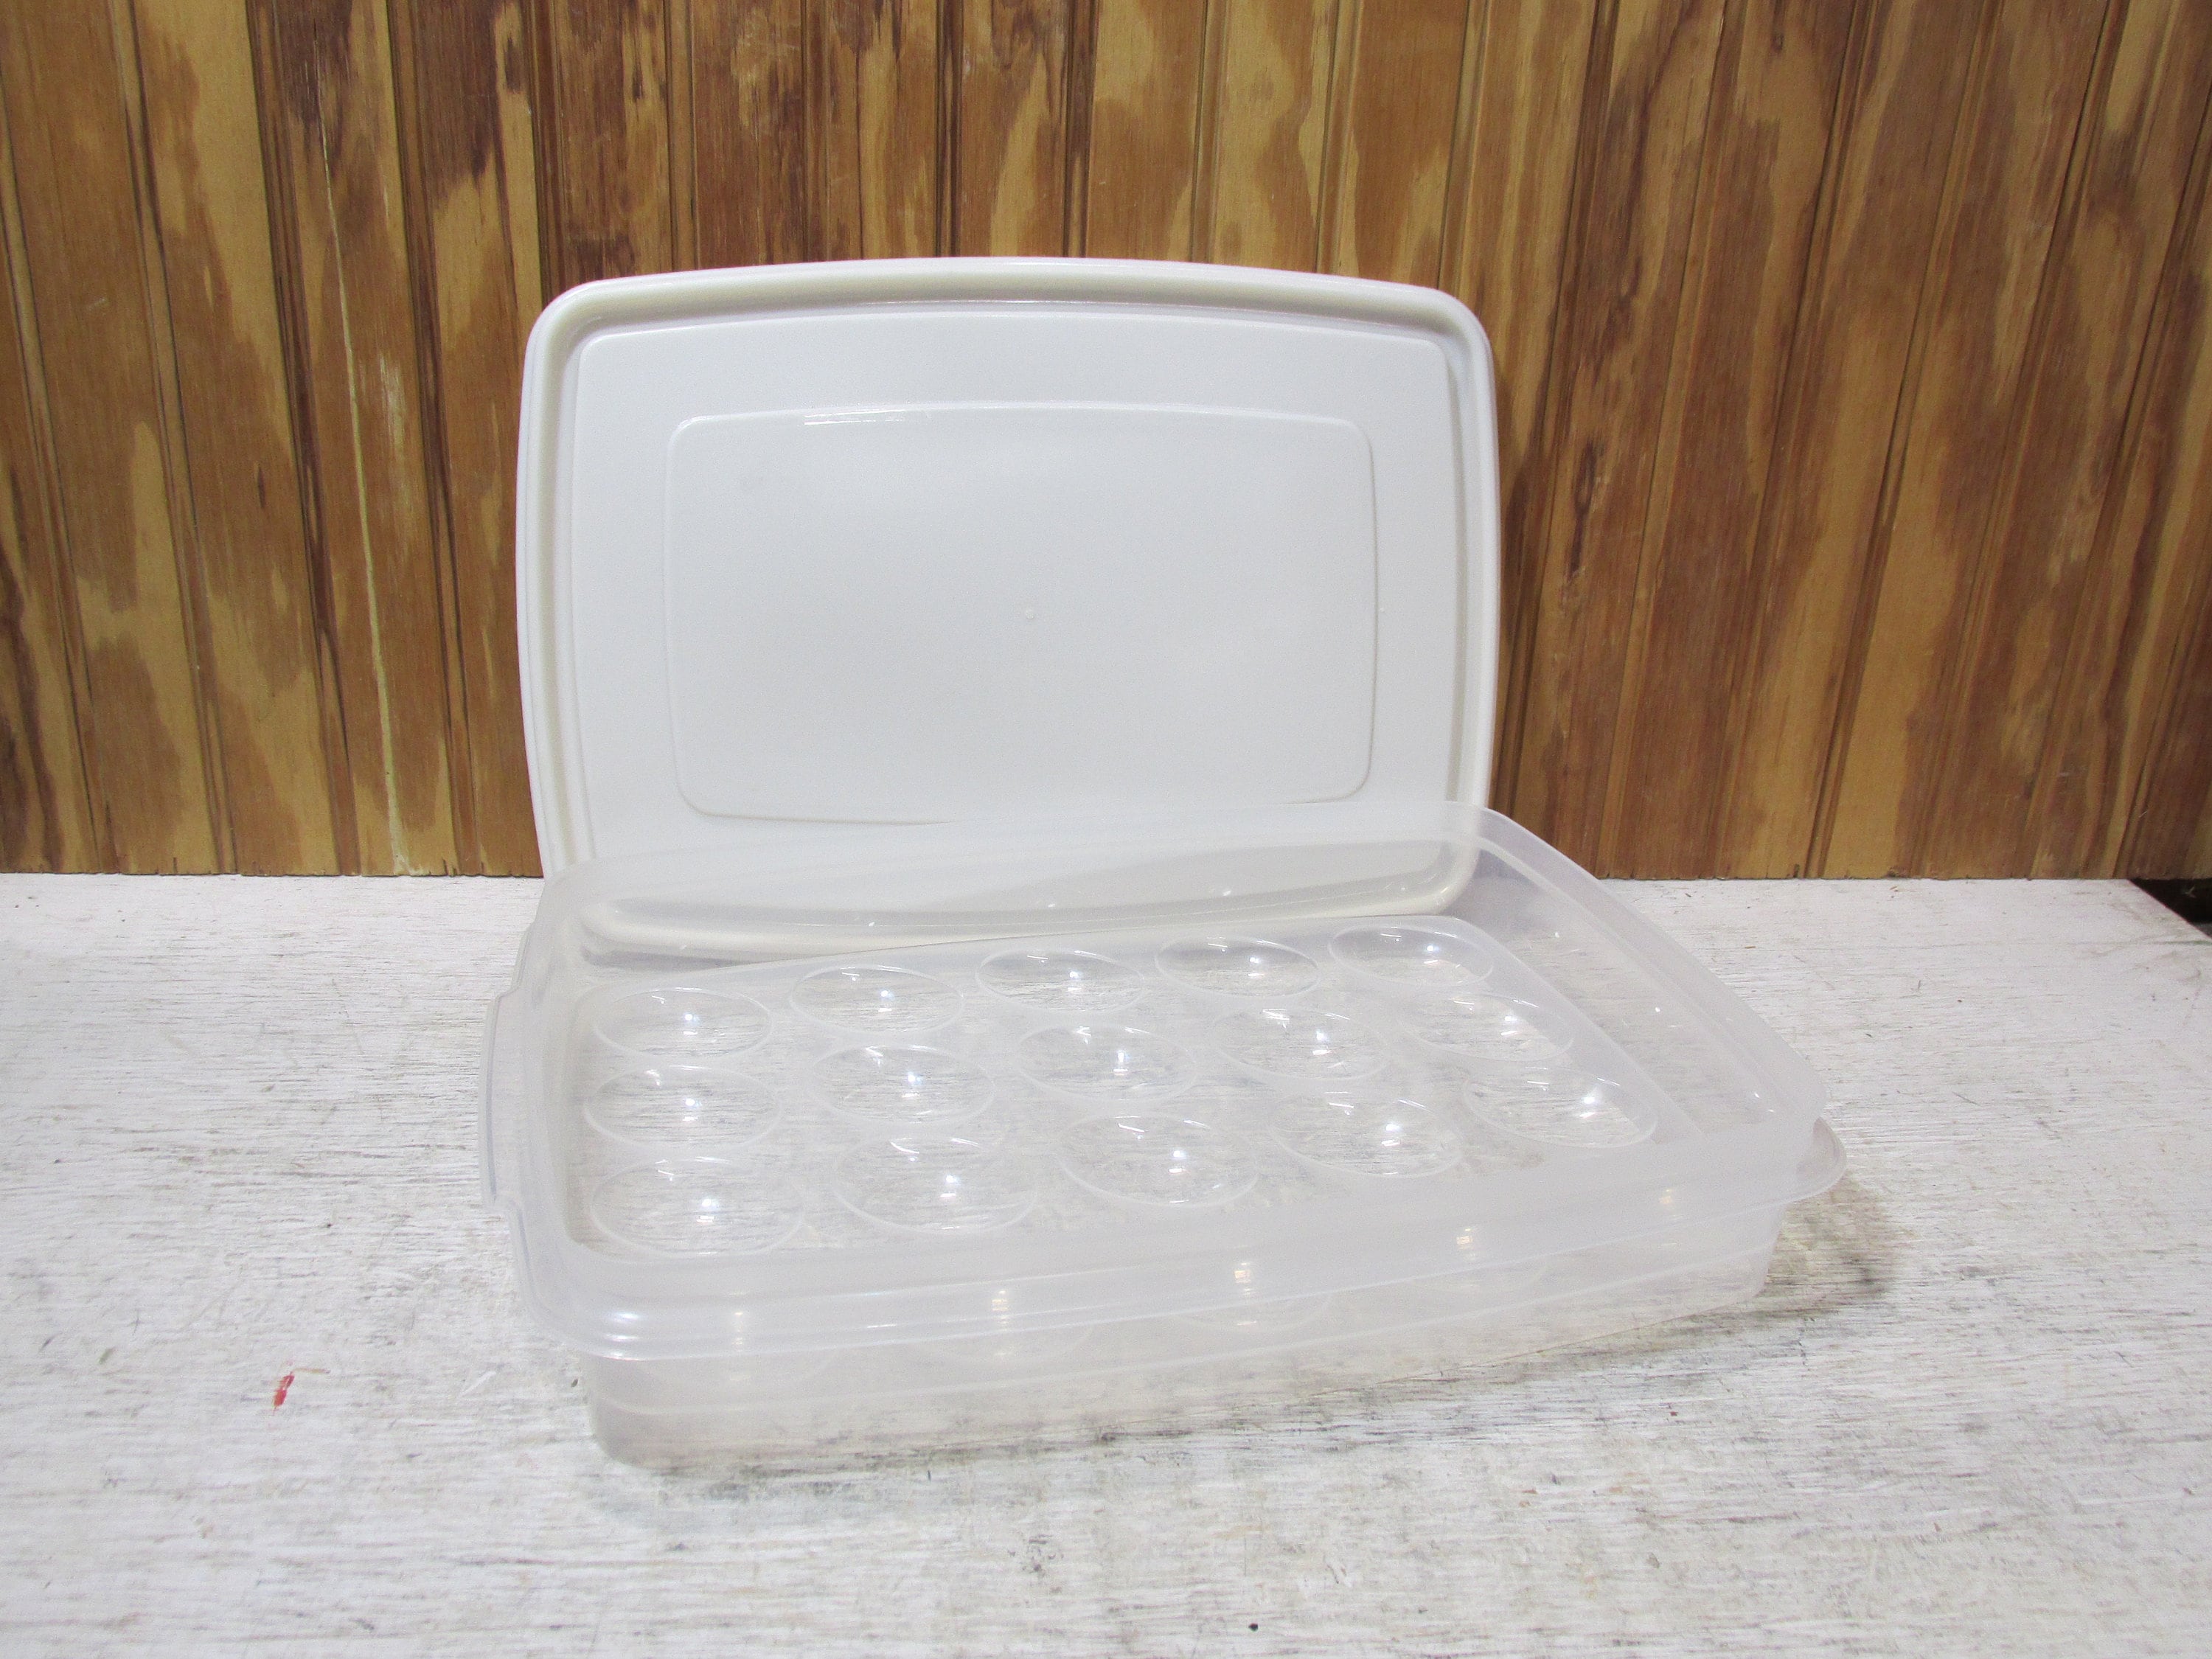 Rubbermaid Microwave Servin Saver Dishes: 4 Oz Bowl, Lid I, or